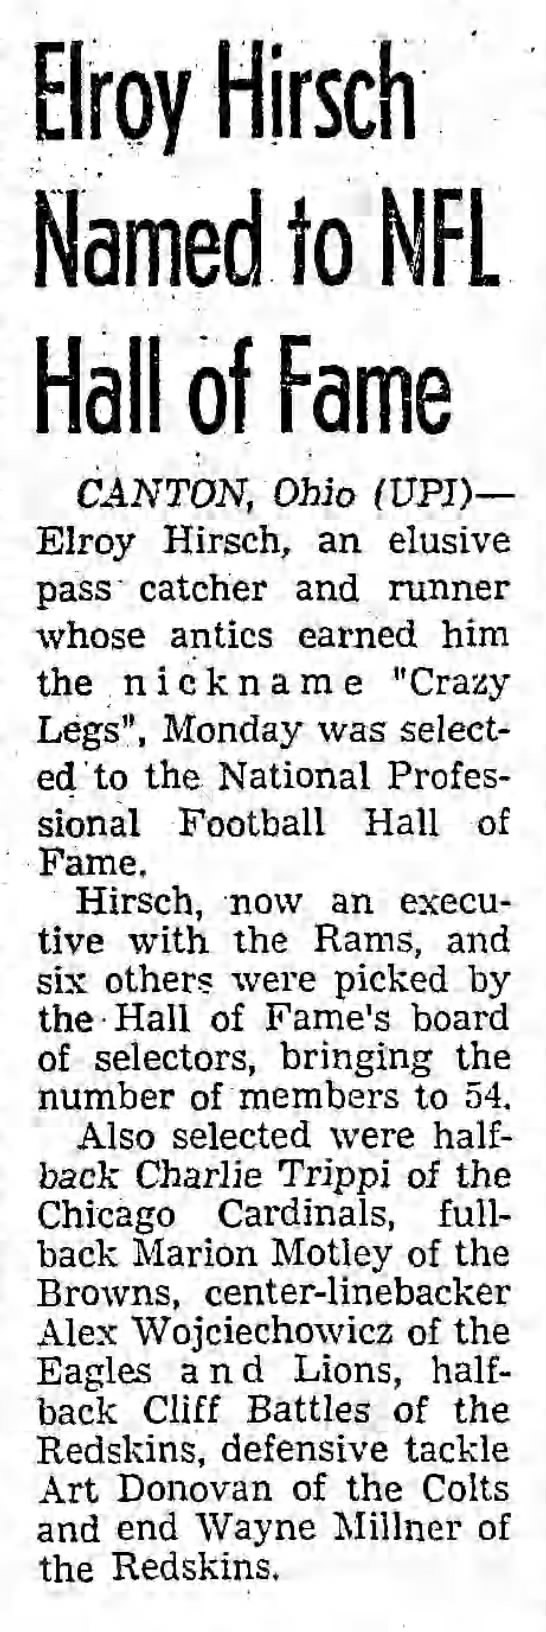 Elroy Hirsch Named to NFL Hall of Fame - 